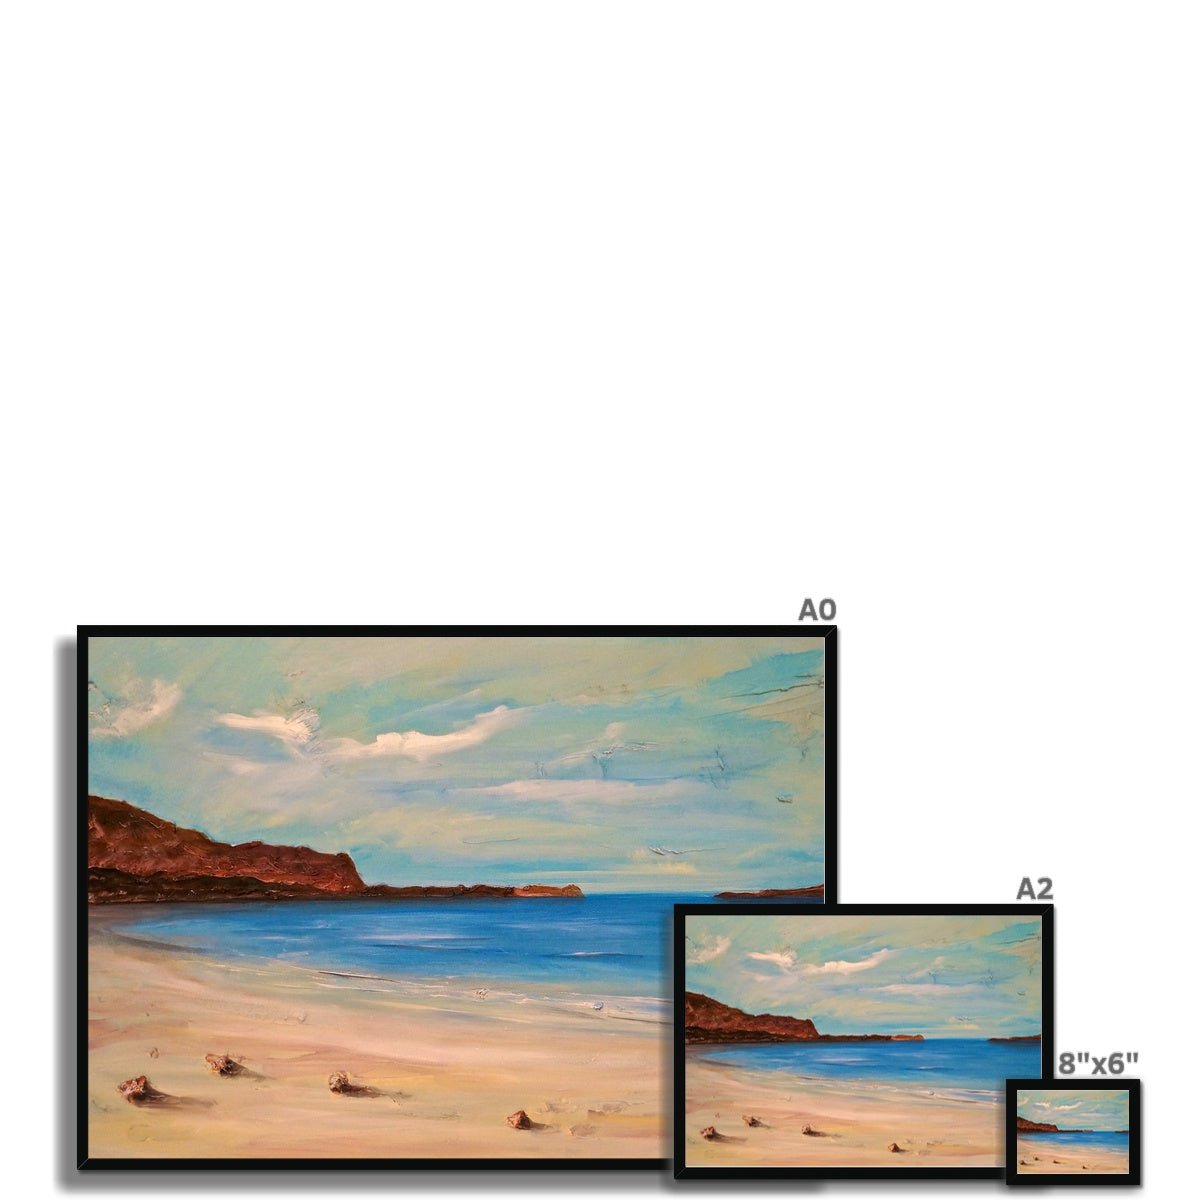 Bosta Beach Lewis Painting | Framed Prints From Scotland-Framed Prints-Hebridean Islands Art Gallery-Paintings, Prints, Homeware, Art Gifts From Scotland By Scottish Artist Kevin Hunter